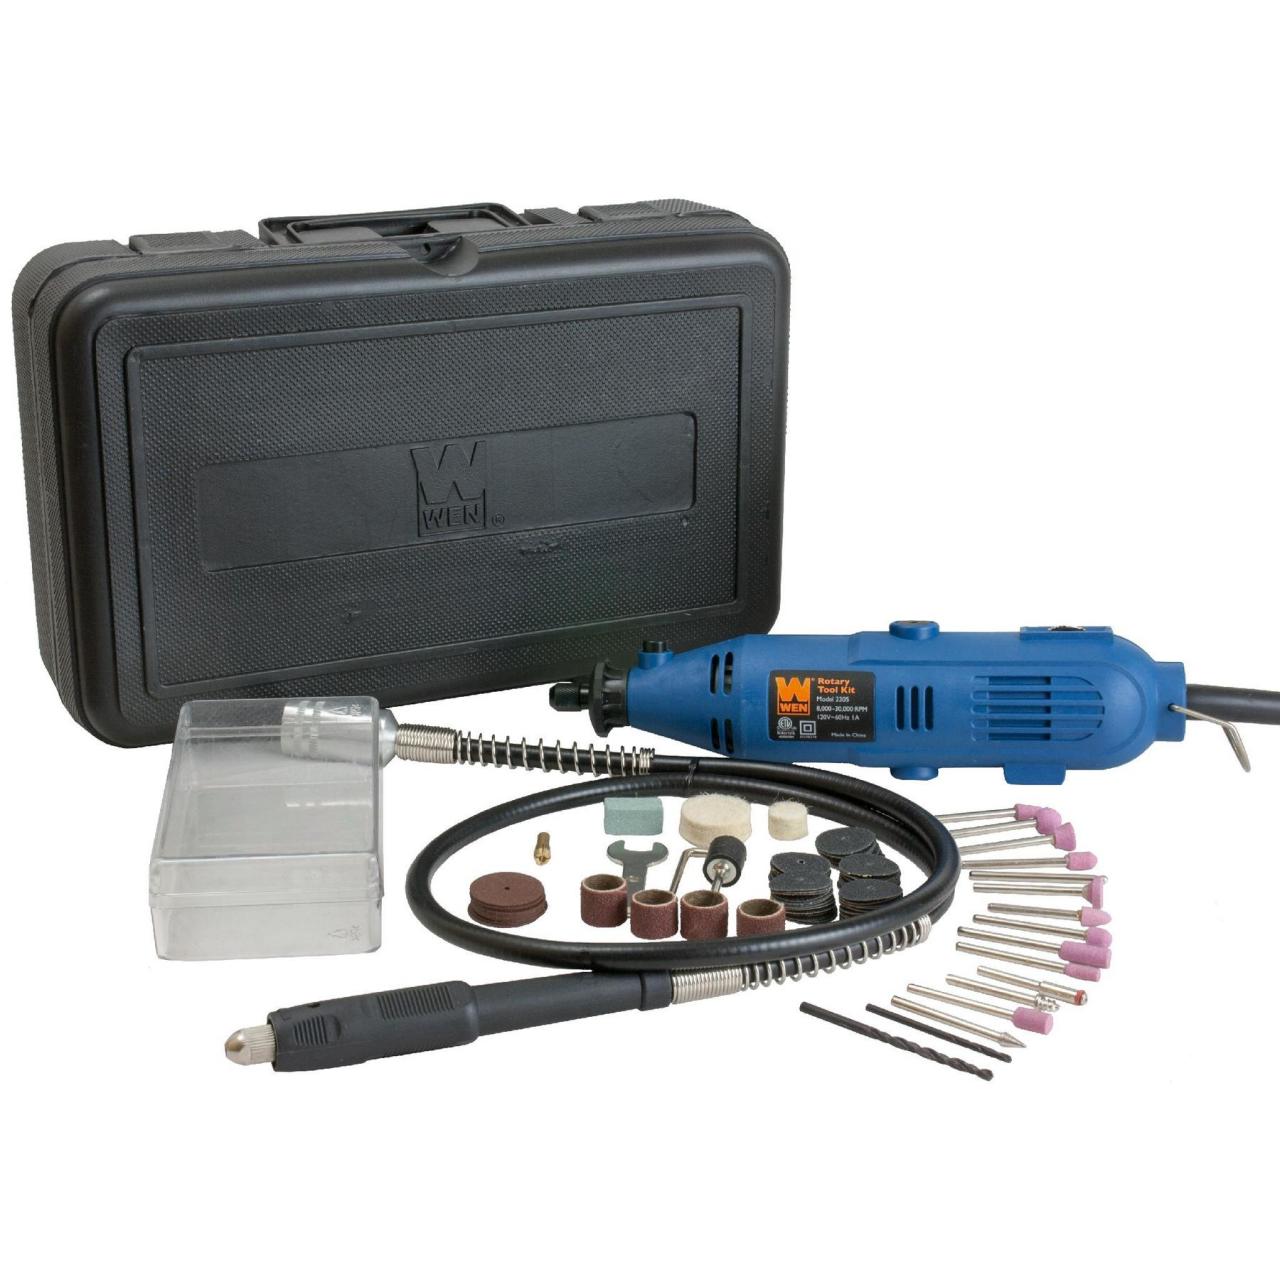 Buy WEN 23190 1.3-Amp Variable Speed Steady-Grip Rotary Tool with 190-Piece  Accessory Kit, Flex Shaft, and Carrying Case Online in Vietnam. B0784JHFKD